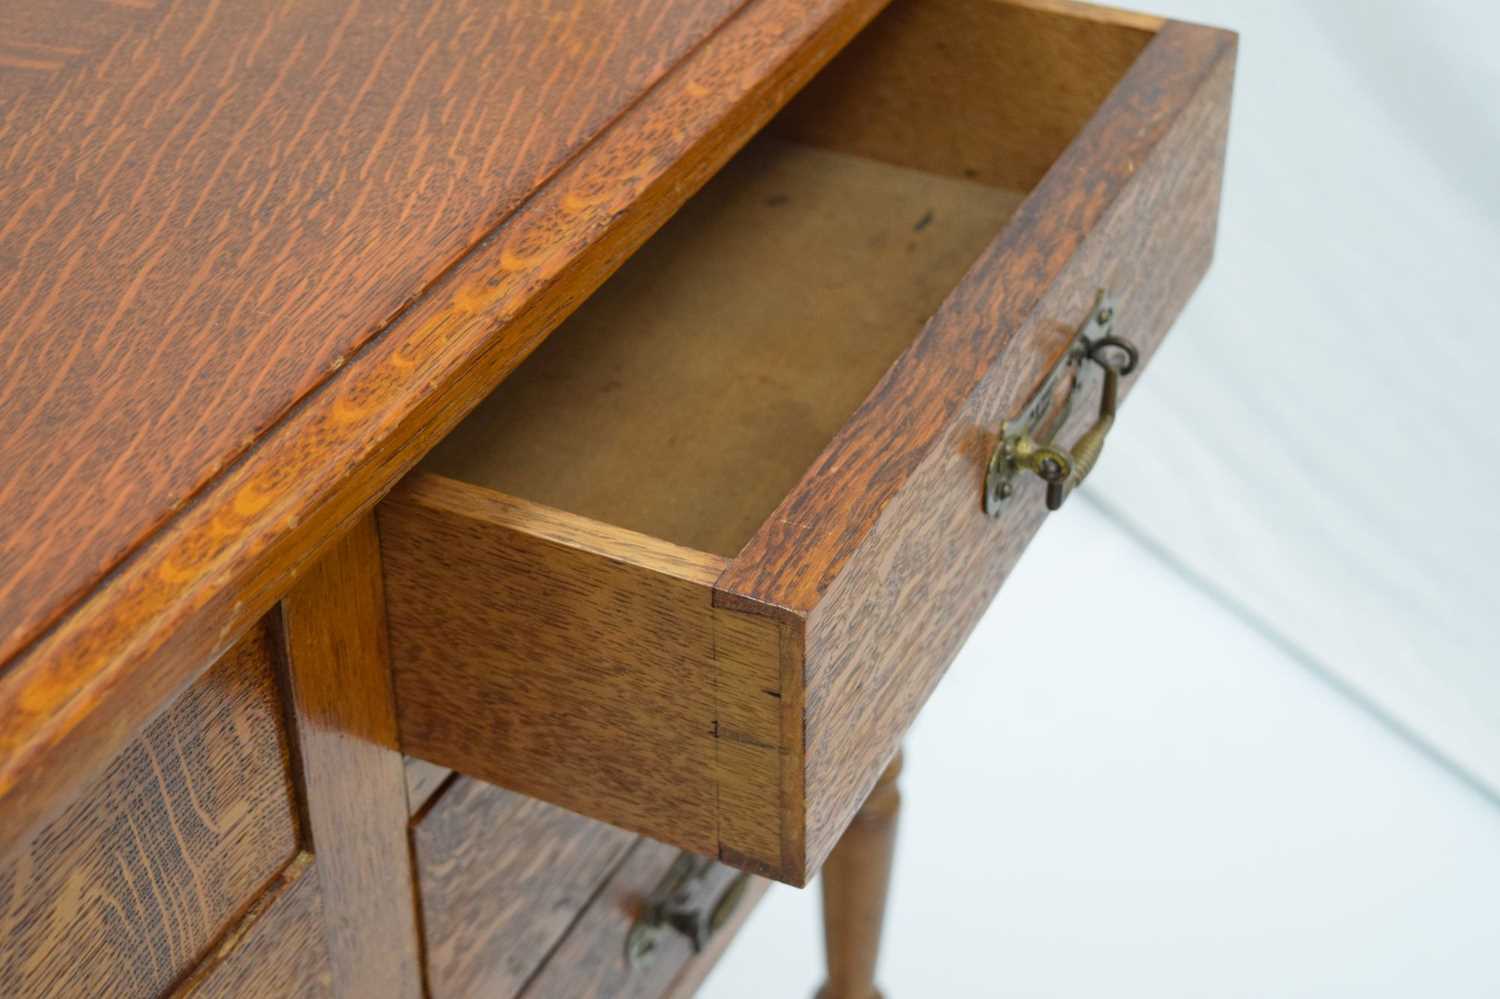 Early 20th century small oak desk - Image 5 of 10